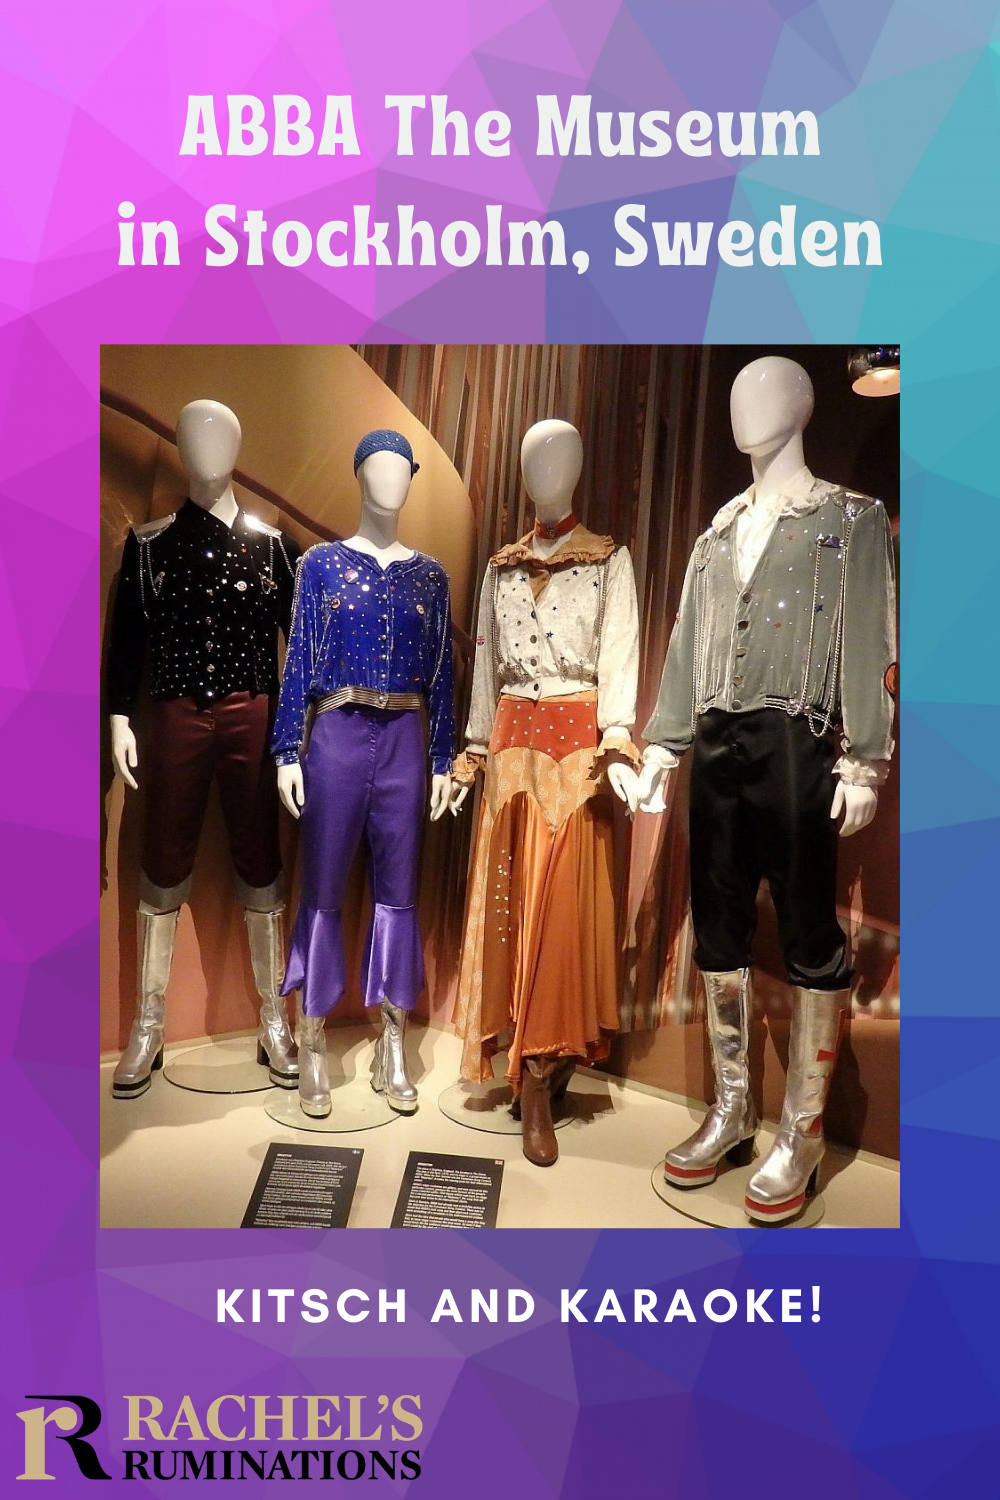 Love them or hate them, unless you’re truly allergic to the sound of ABBA's music, you’ll enjoy the ABBA Museum in Stockholm. Read all about it here! #ABBA #Stockholm #Sweden #Eurovision via @rachelsruminations